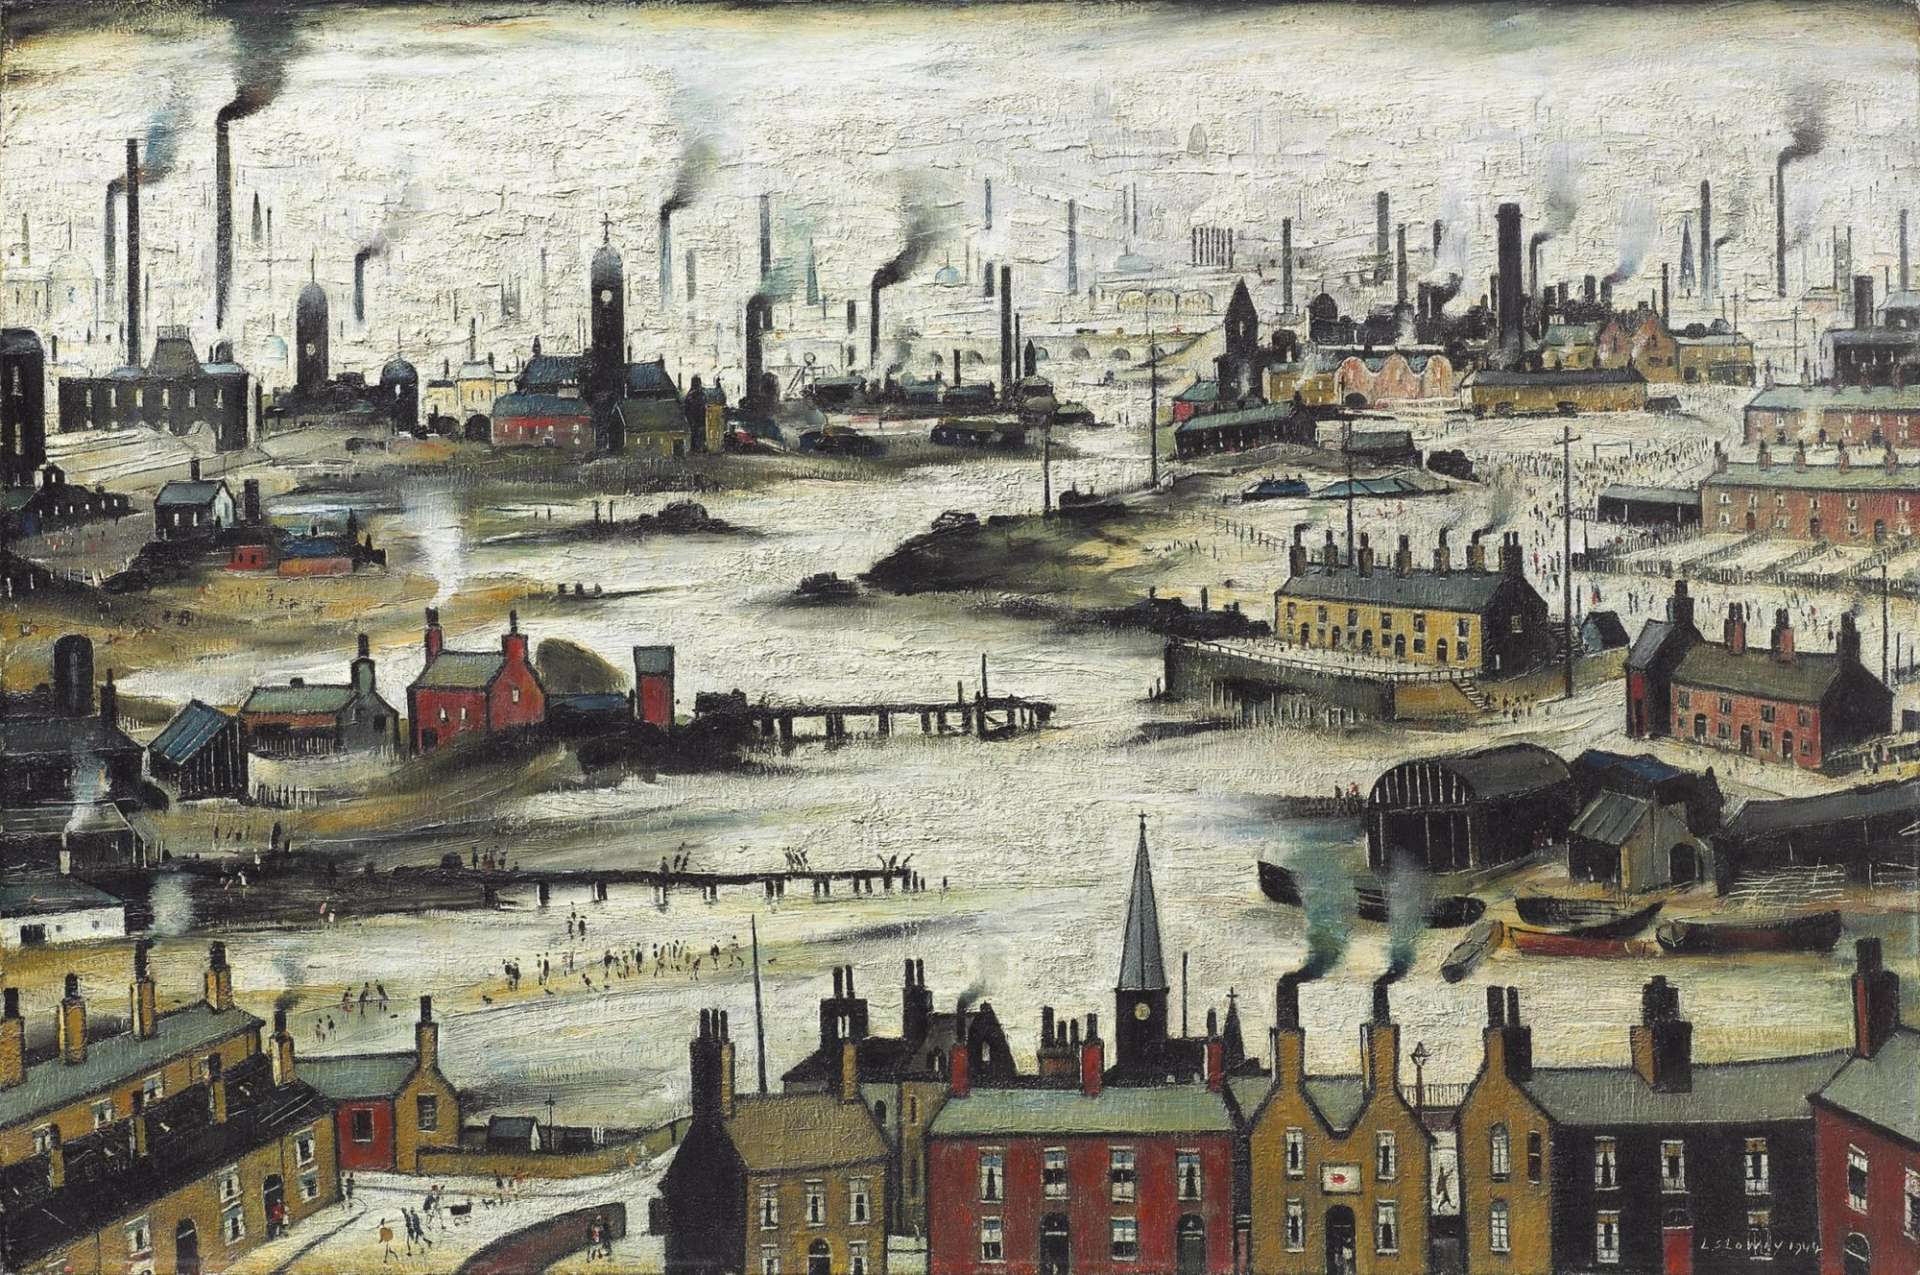 Industrial Landscape by L S Lowry